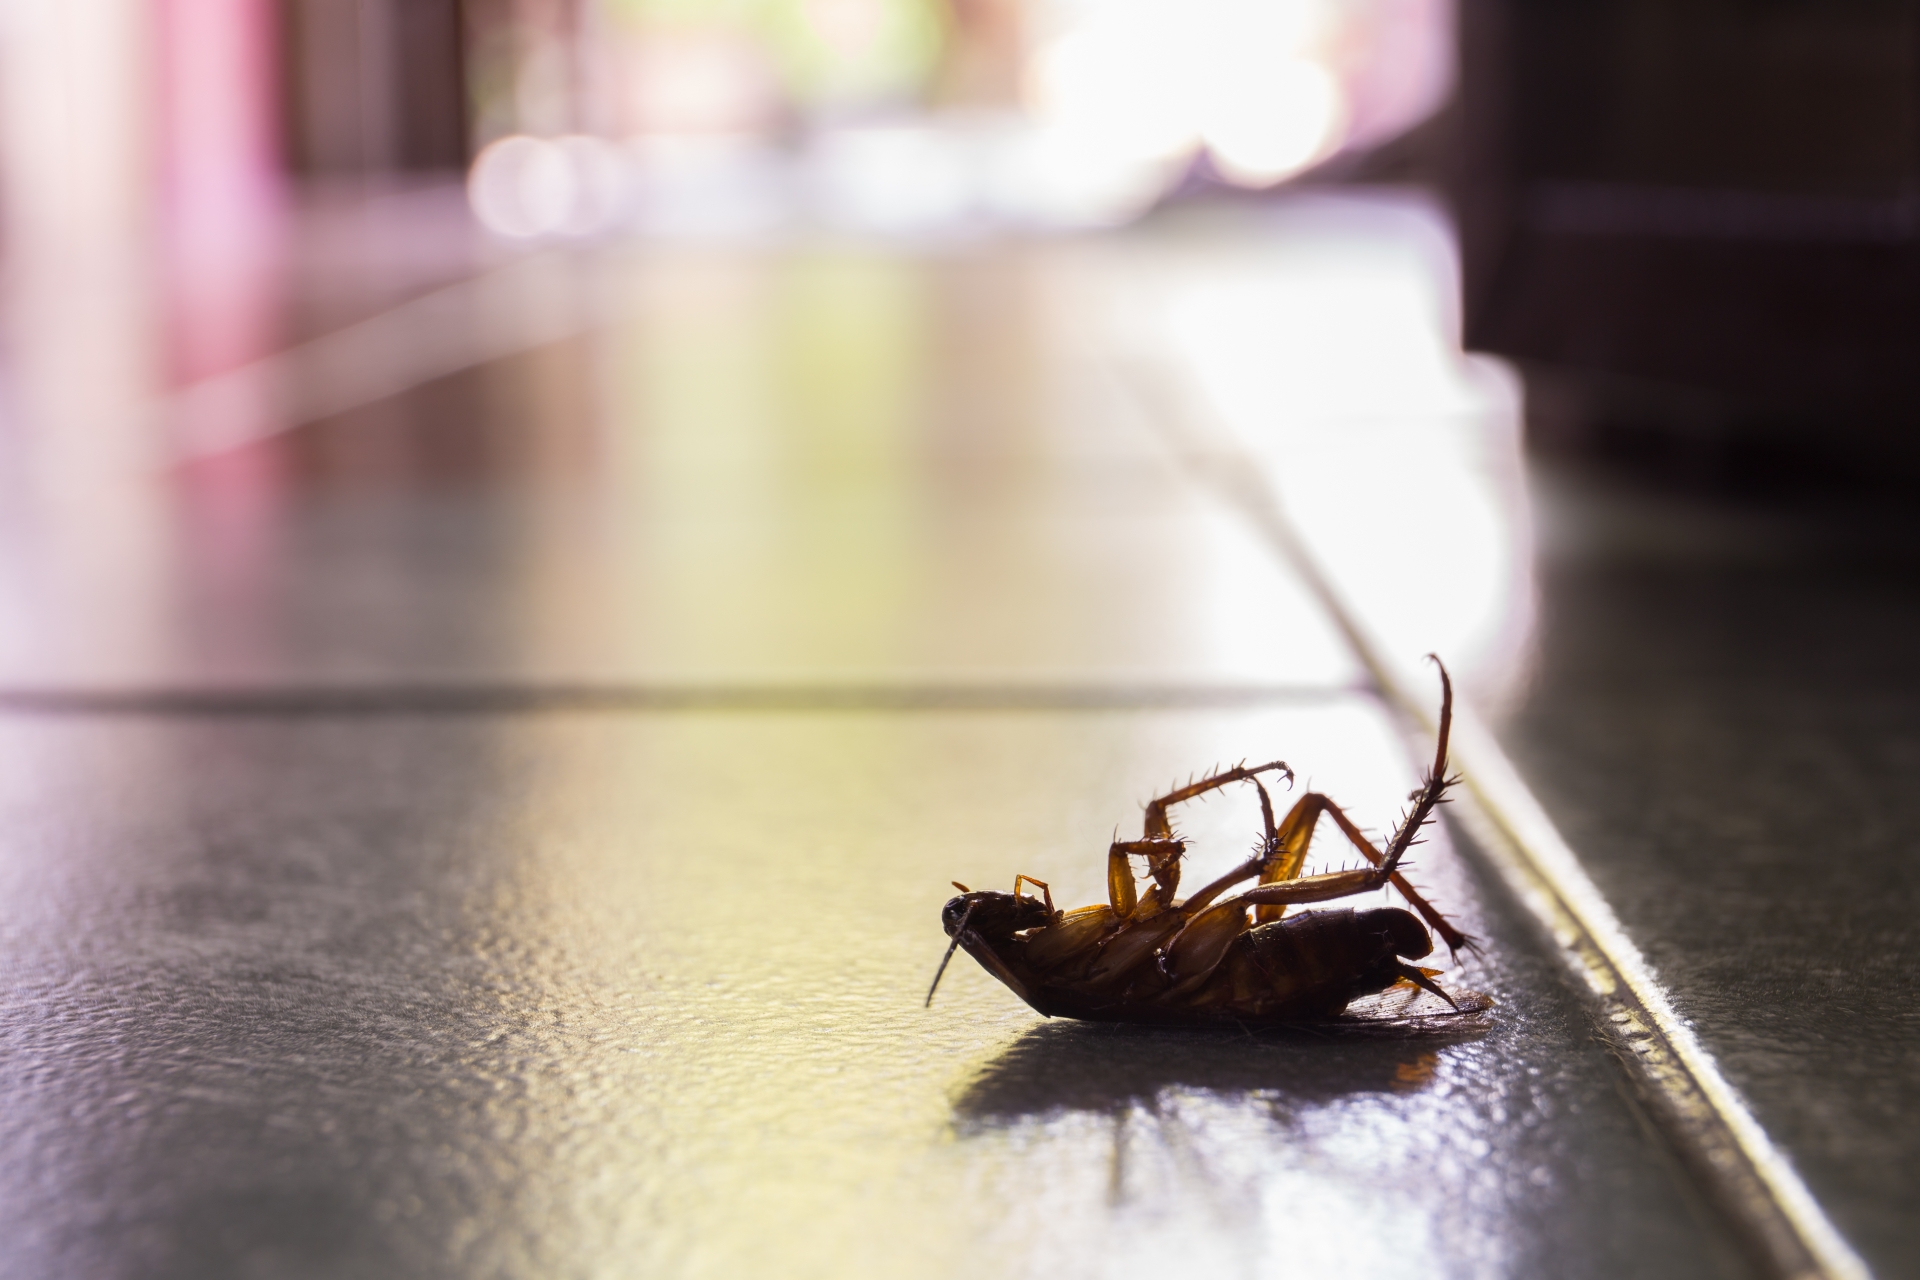 Cockroach Control, Pest Control in Stratford, West Ham, E15. Call Now 020 8166 9746